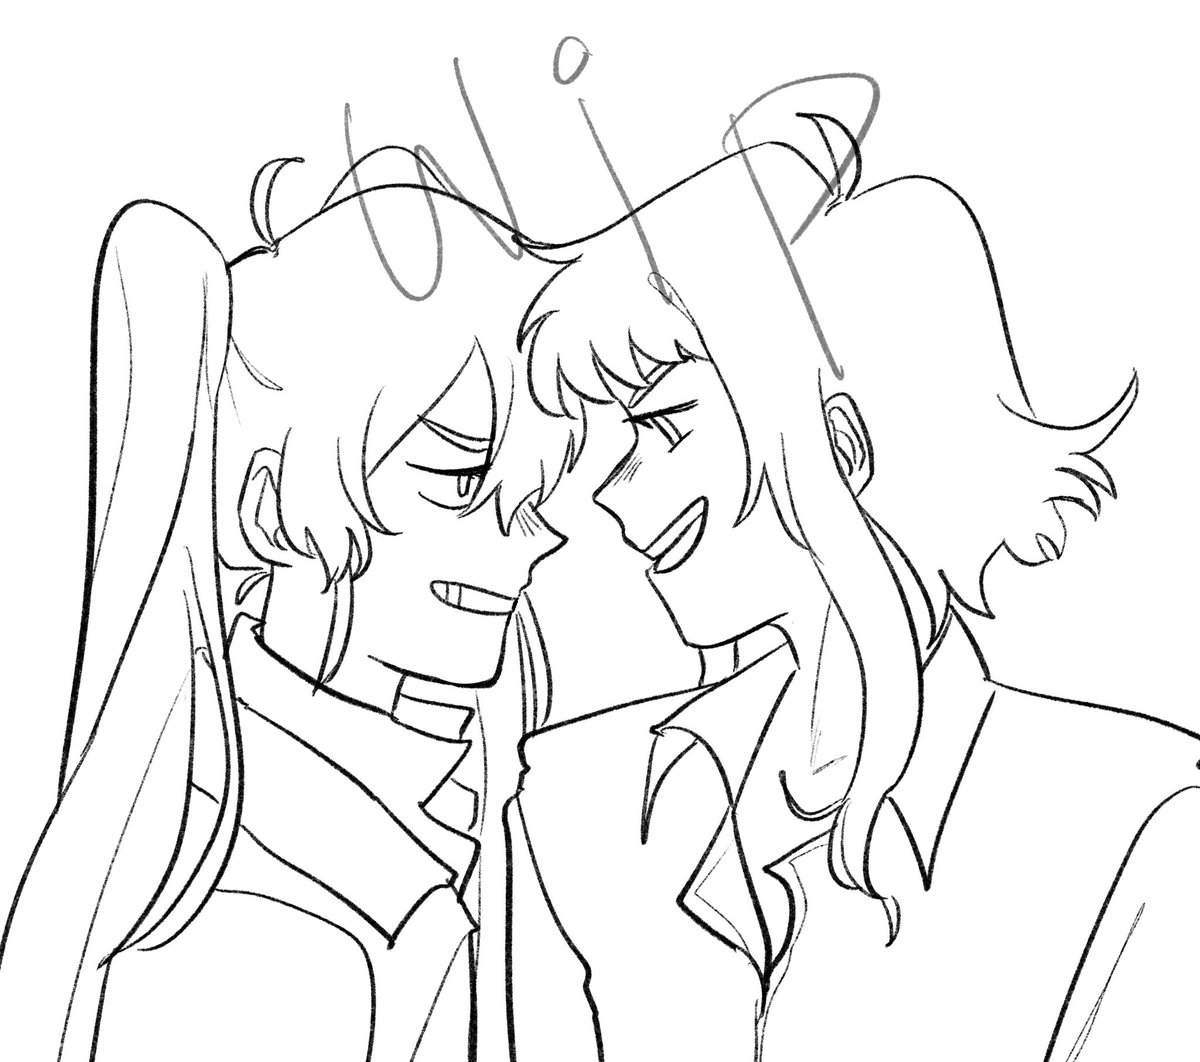 [WIP]

gumi and miku dancing..... dare i say in the street 